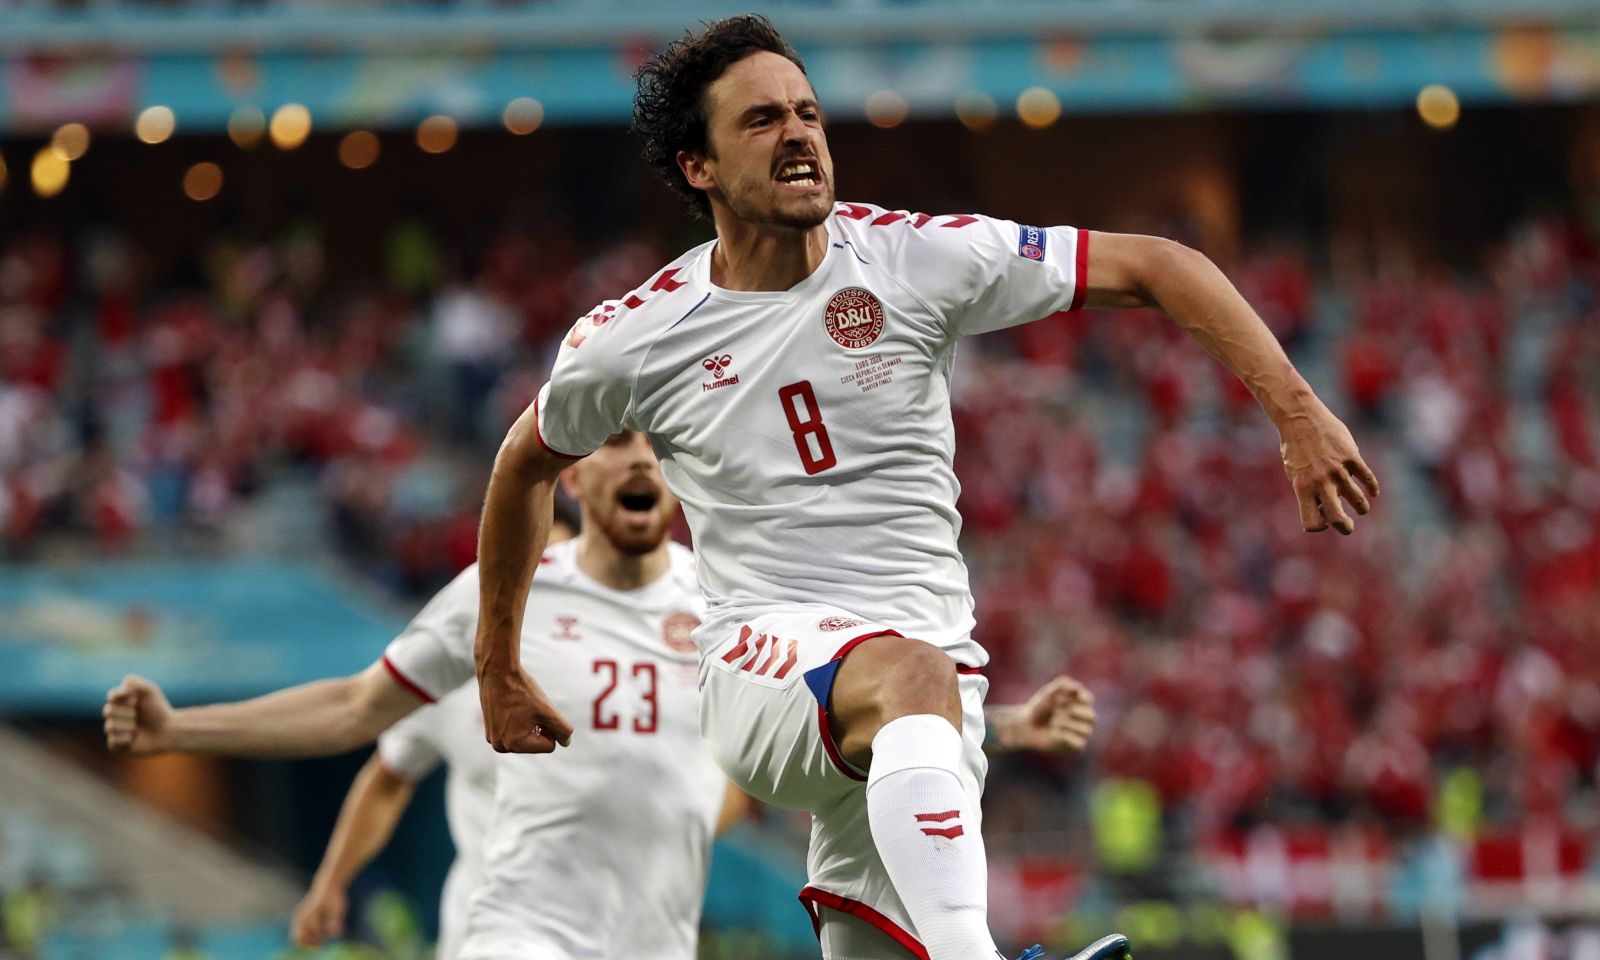 epa09320486 Thomas Delaney of Denmark celebrates scoring the 1-0 during the UEFA EURO 2020 quarter final match between the Czech Republic and Denmark in Baku, Azerbaijan, 03 July 2021.  EPA/Valentin Ogirenko / POOL (RESTRICTIONS: For editorial news reporting purposes only. Images must appear as still images and must not emulate match action video footage. Photographs published in online publications shall have an interval of at least 20 seconds between the posting.)